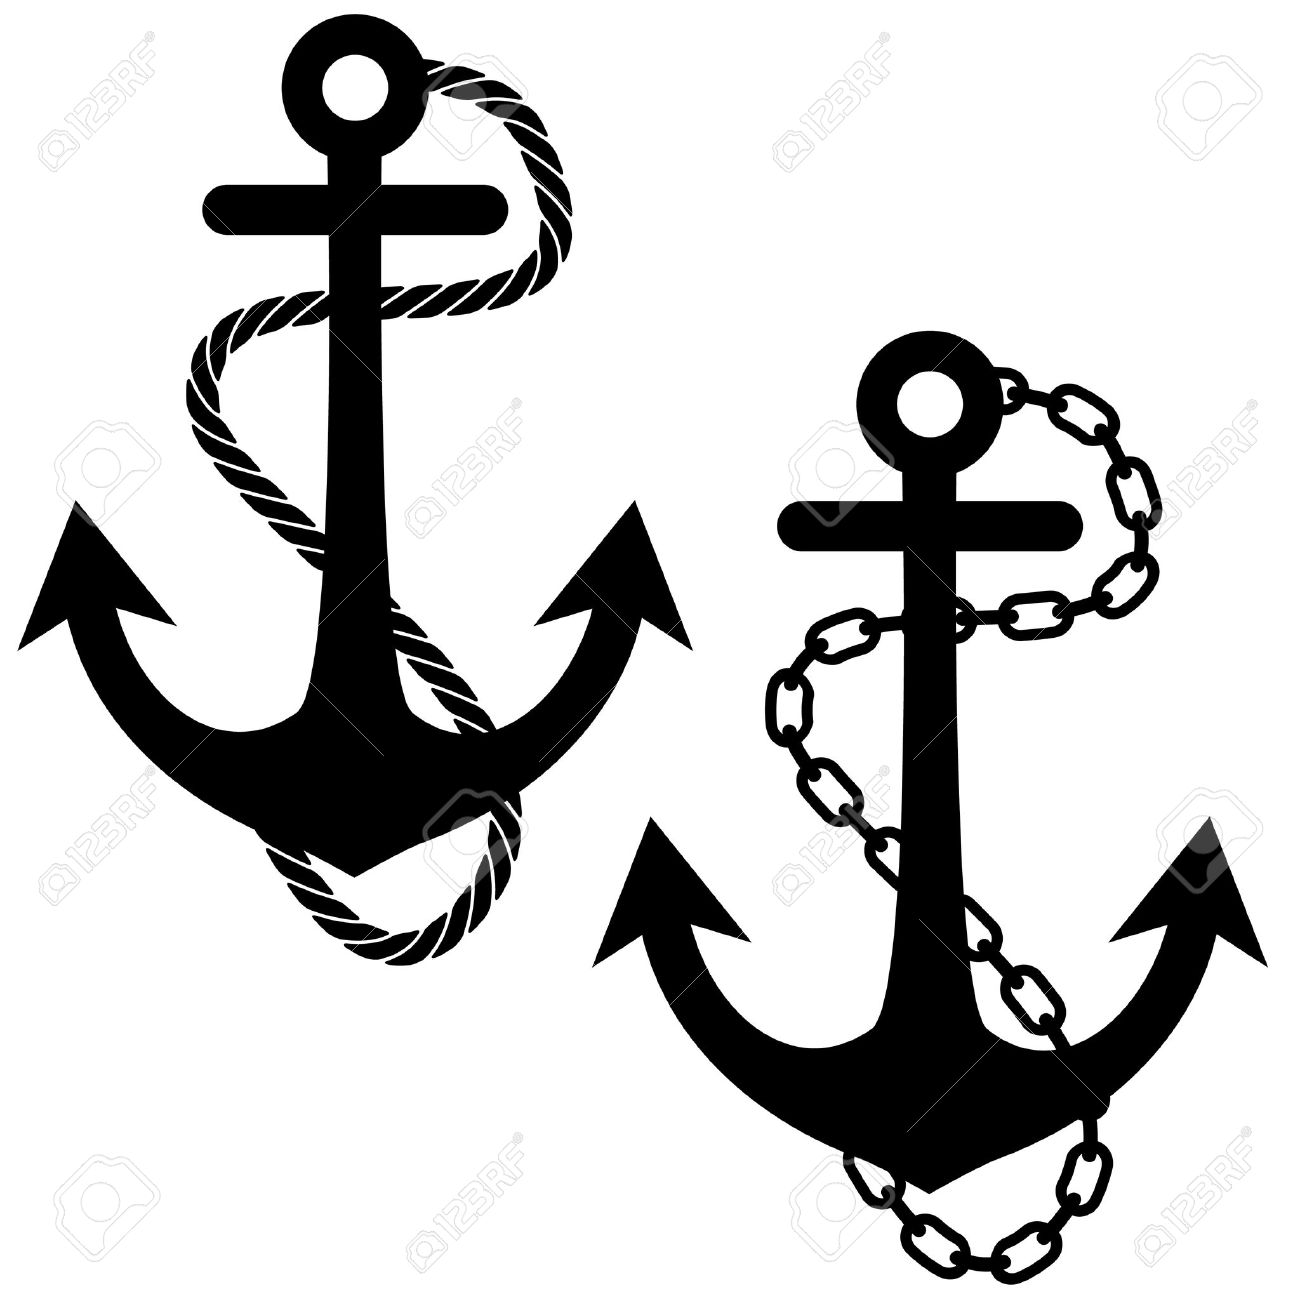 Anchor With Rope Clipart.